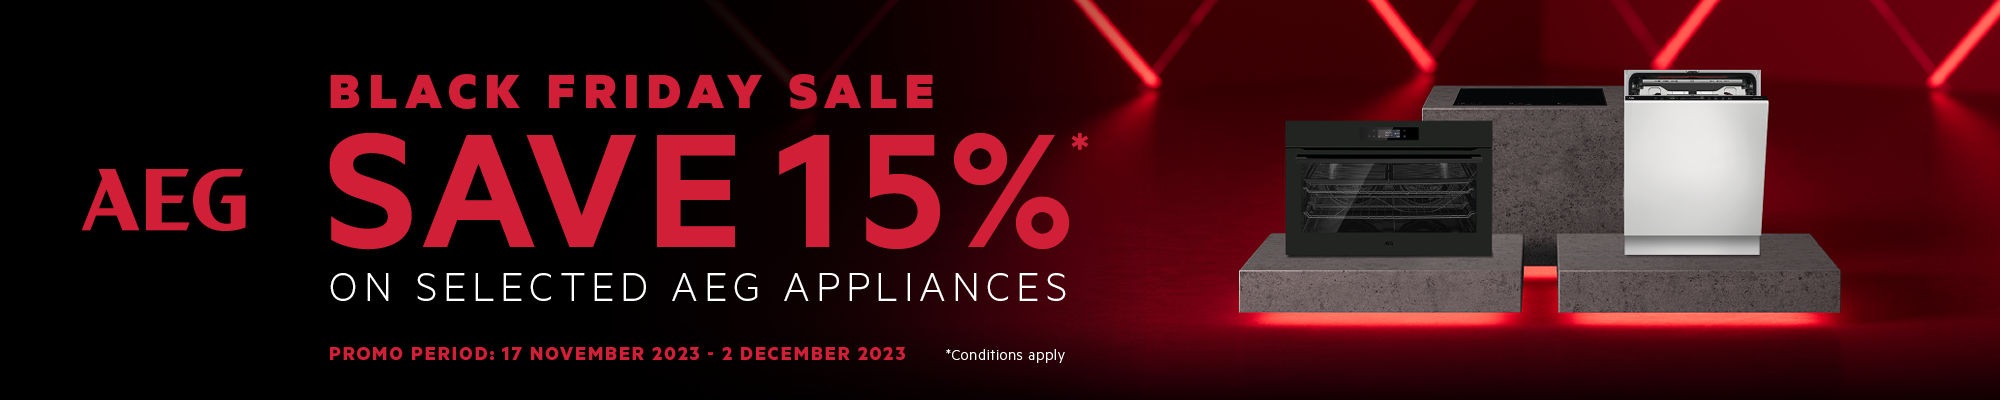 Save Up To 15%* On Selected Appliances During AEG Black Friday Sale